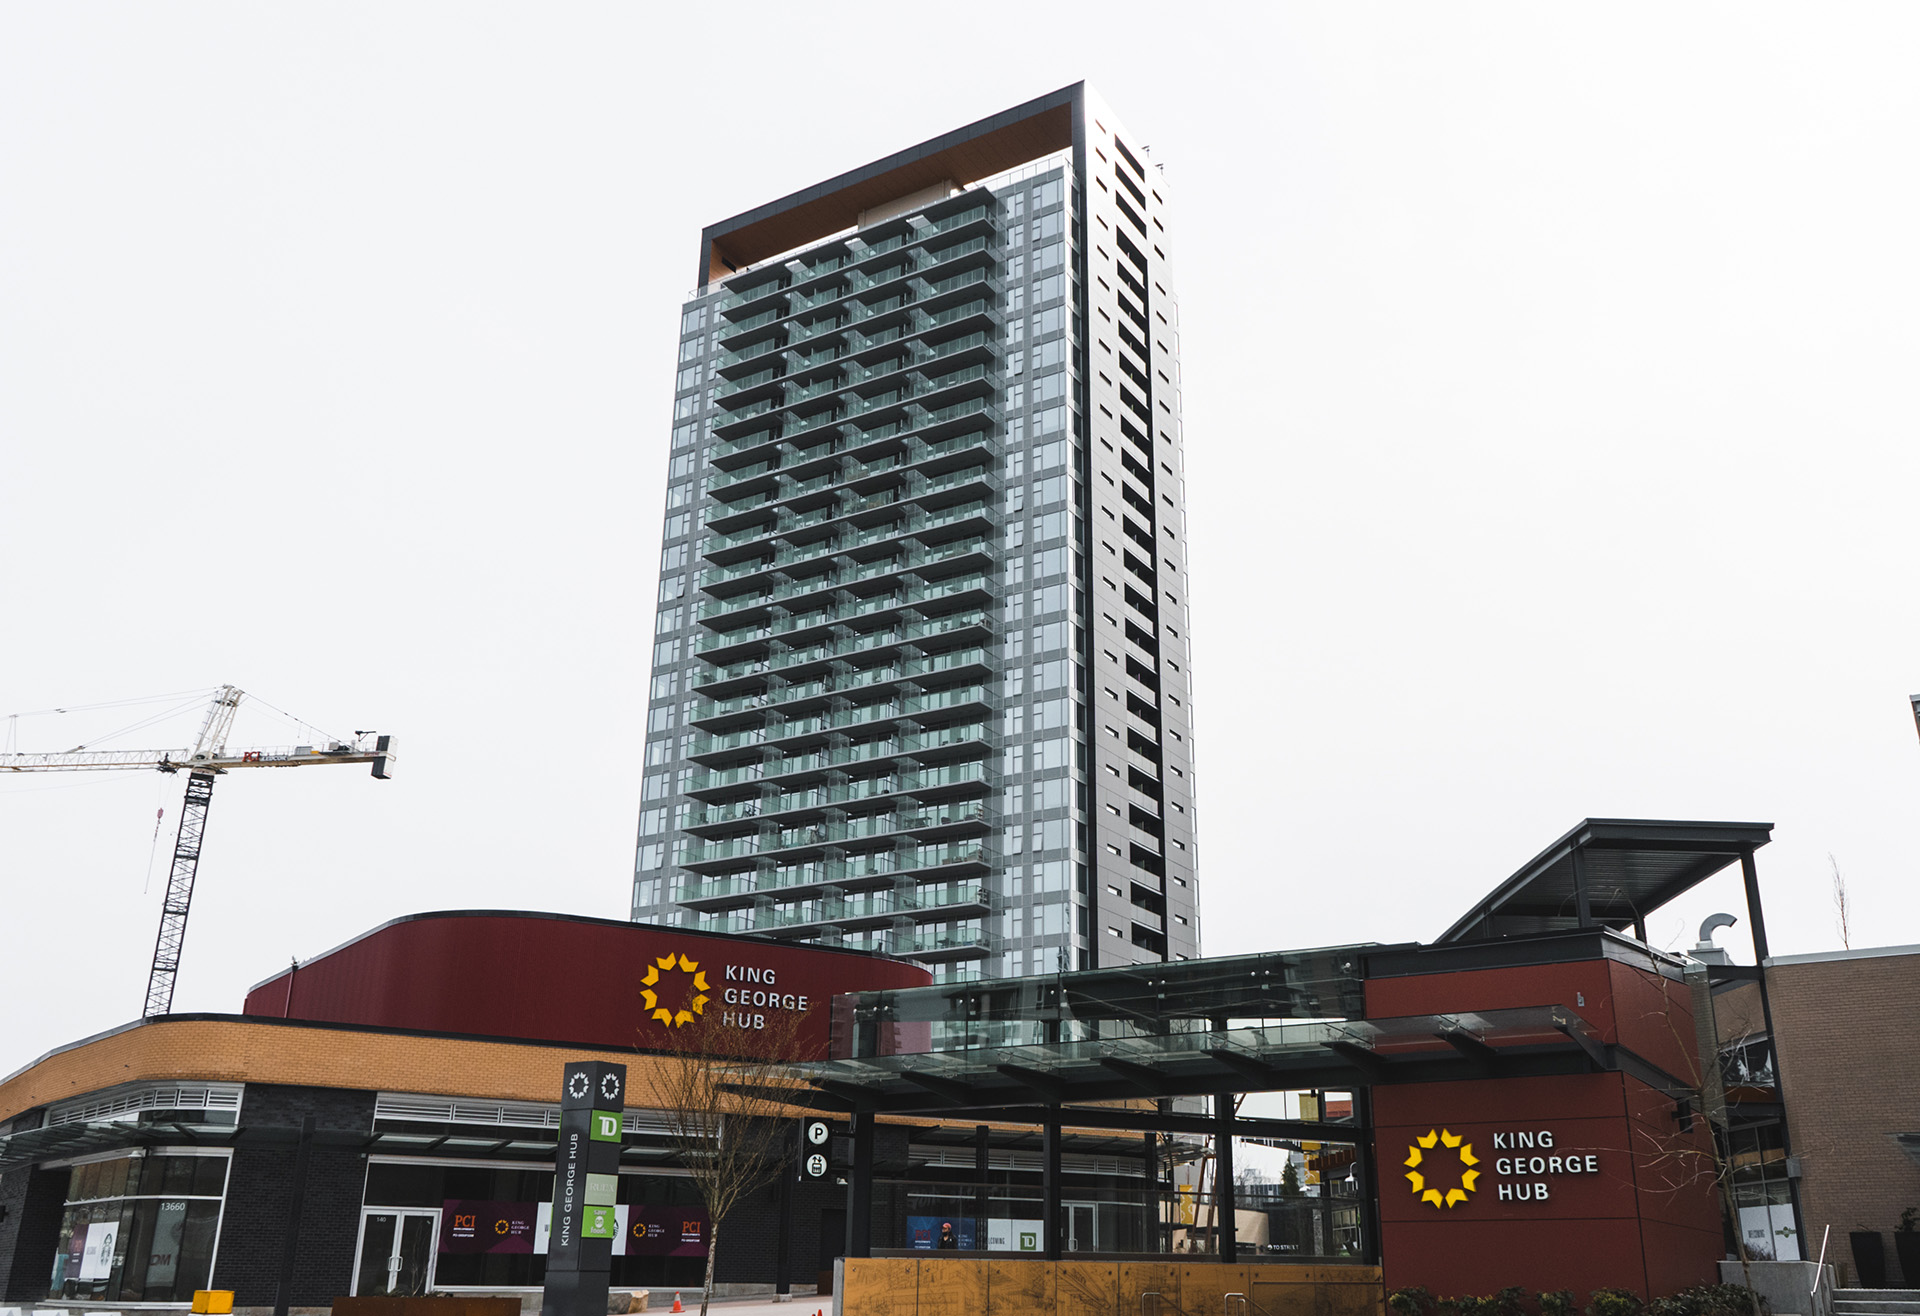 A tower at the King George Hub transit-oriented development in Surrey